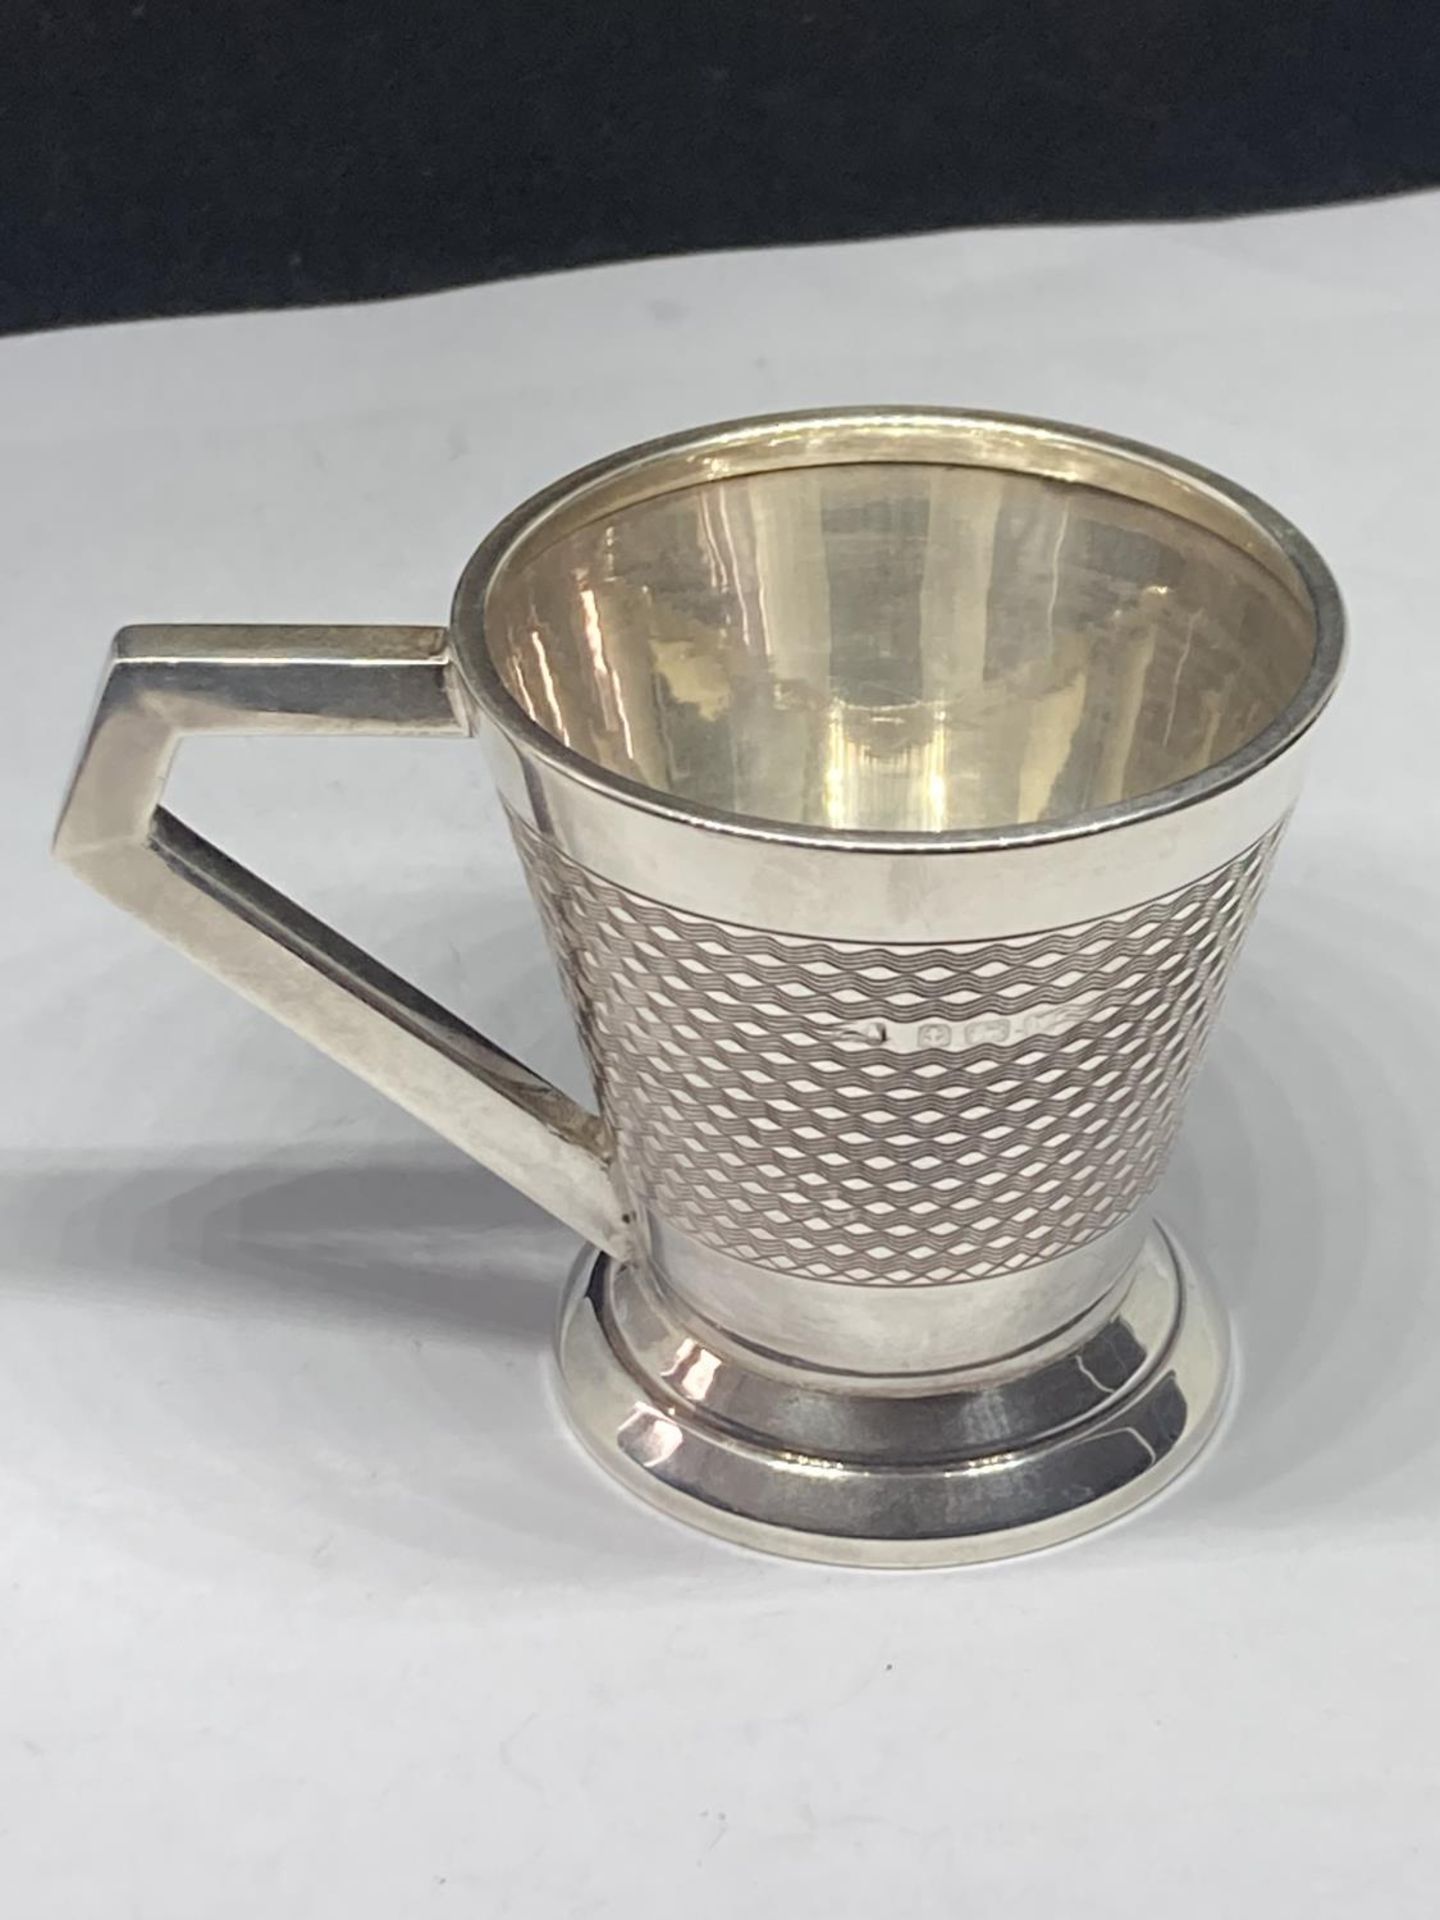 A HALLMARKED BIRMINGHAM SILVER CUP GROSS WEIGHT 75.5 GRAMS (ENGRAVED) - Image 3 of 4